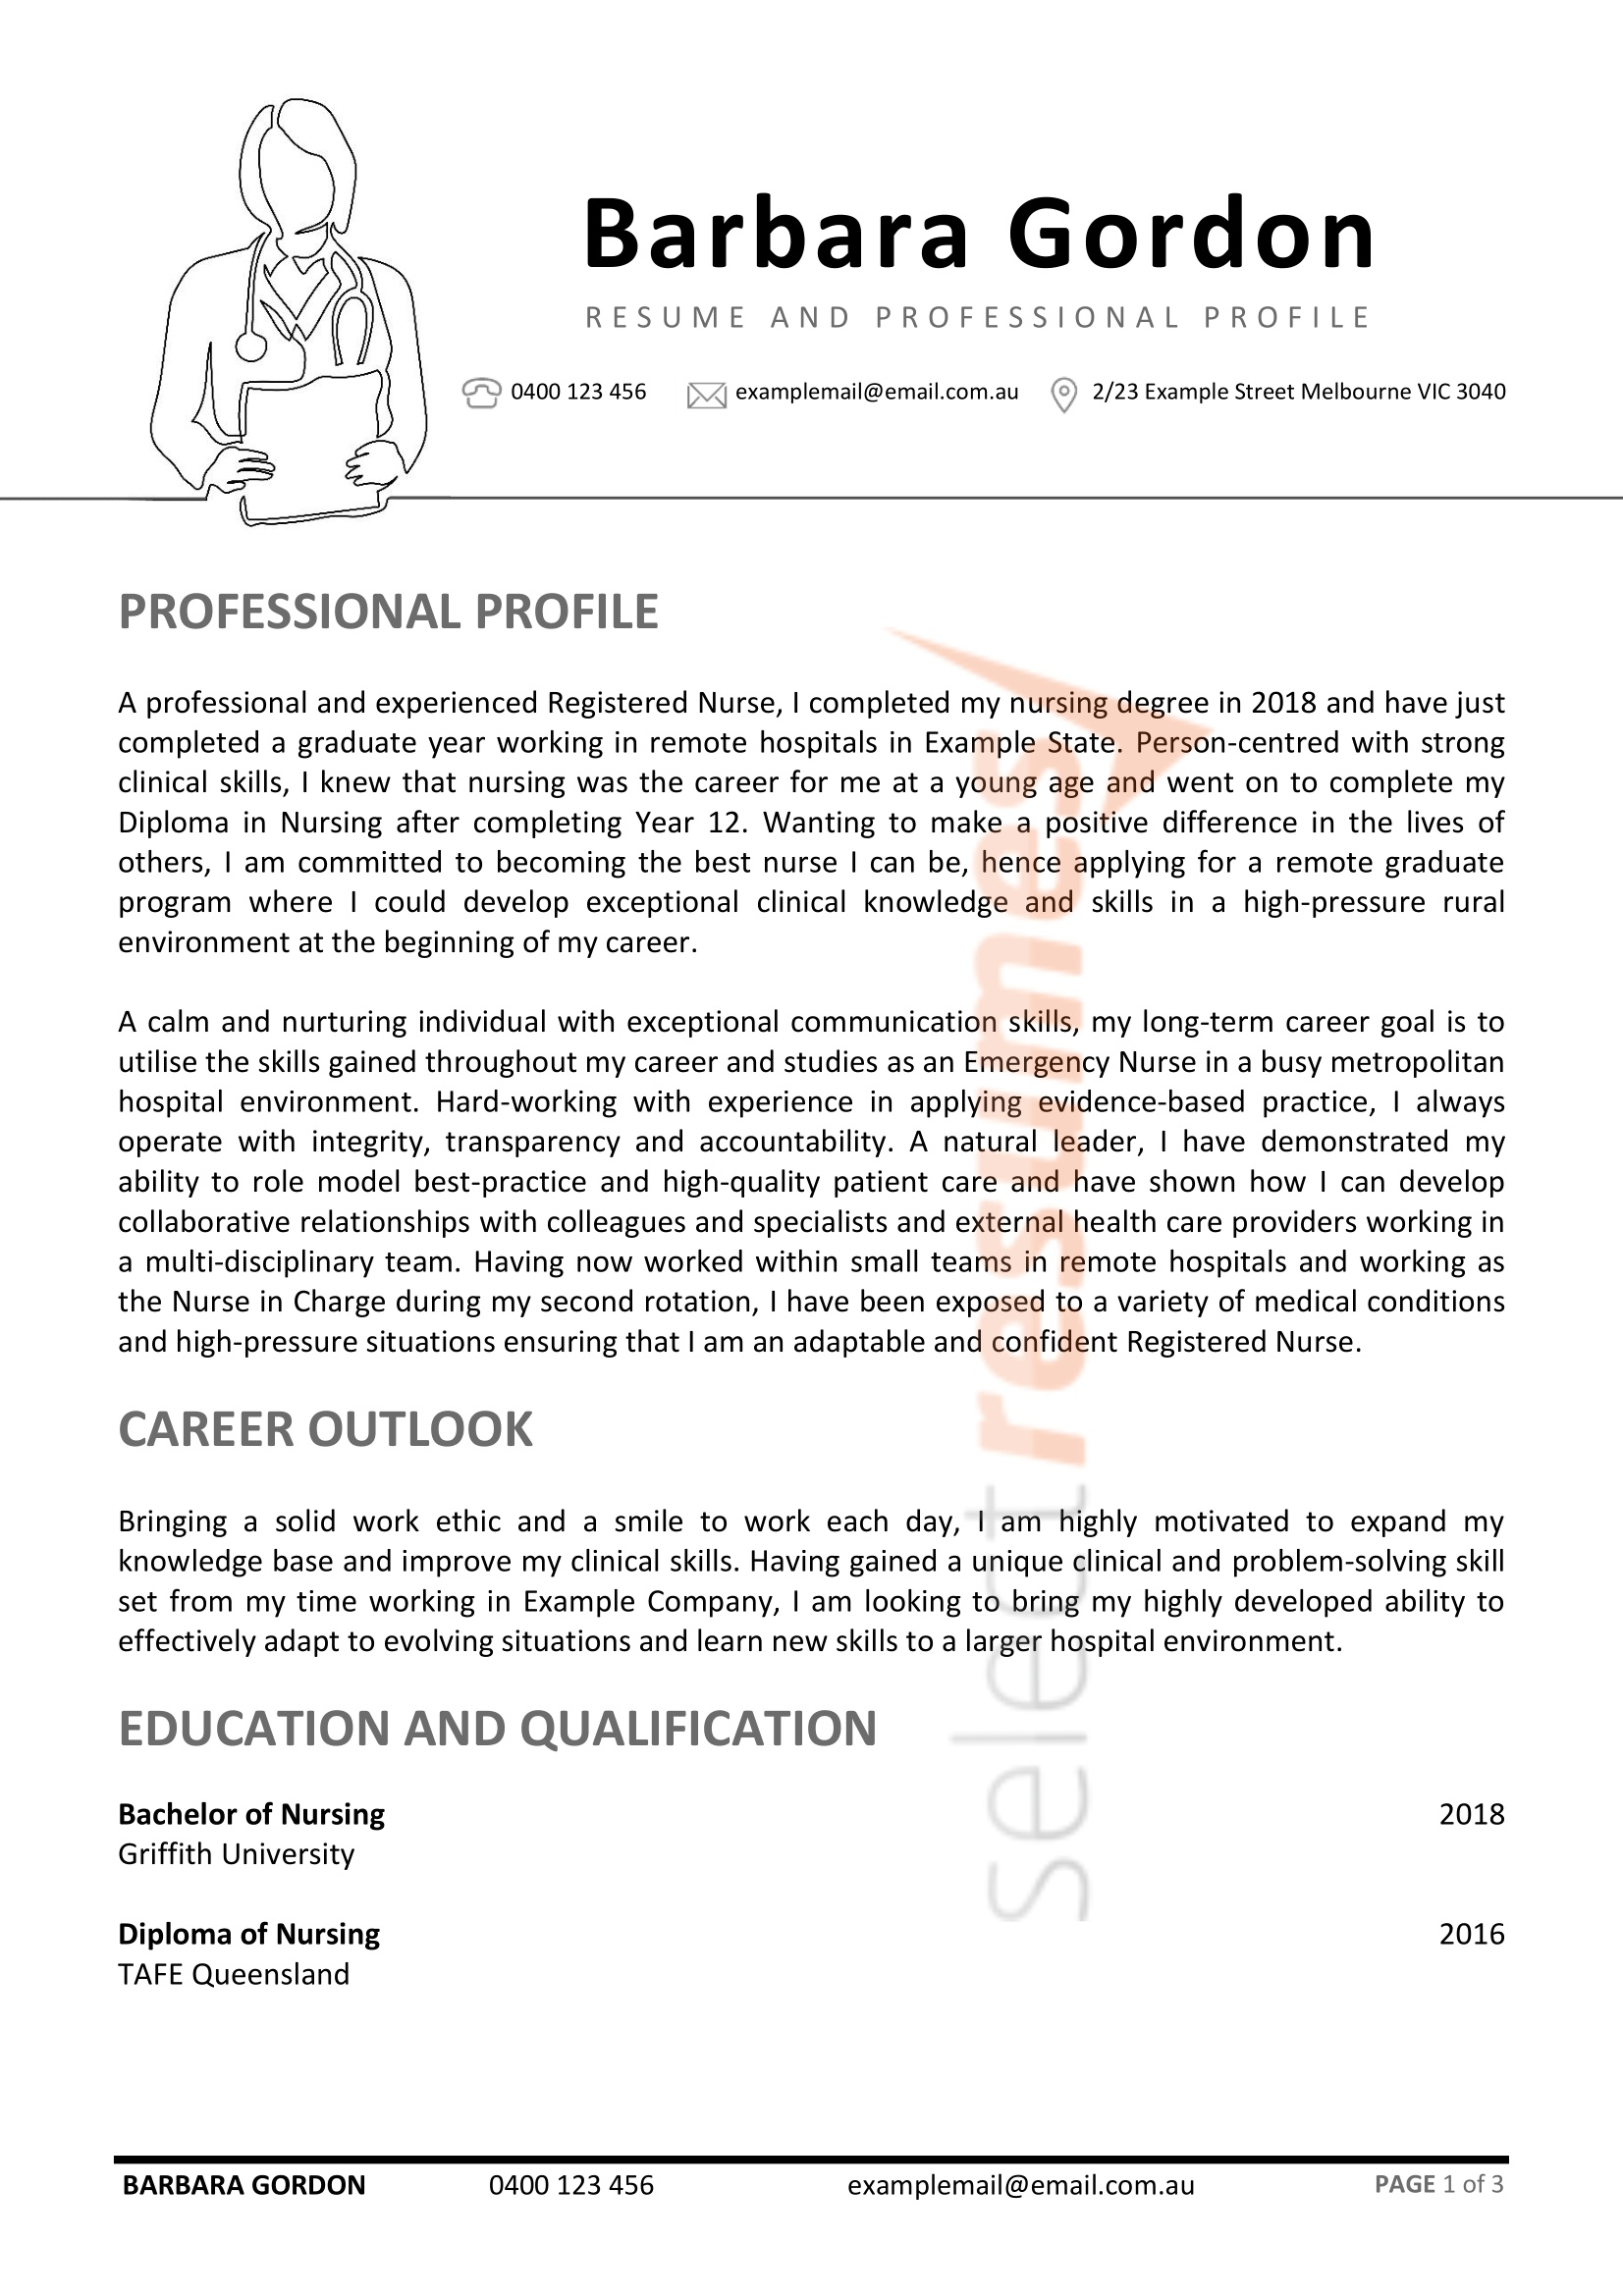 Resume Designs Archive Select Resumes throughout proportions 1653 X 2339